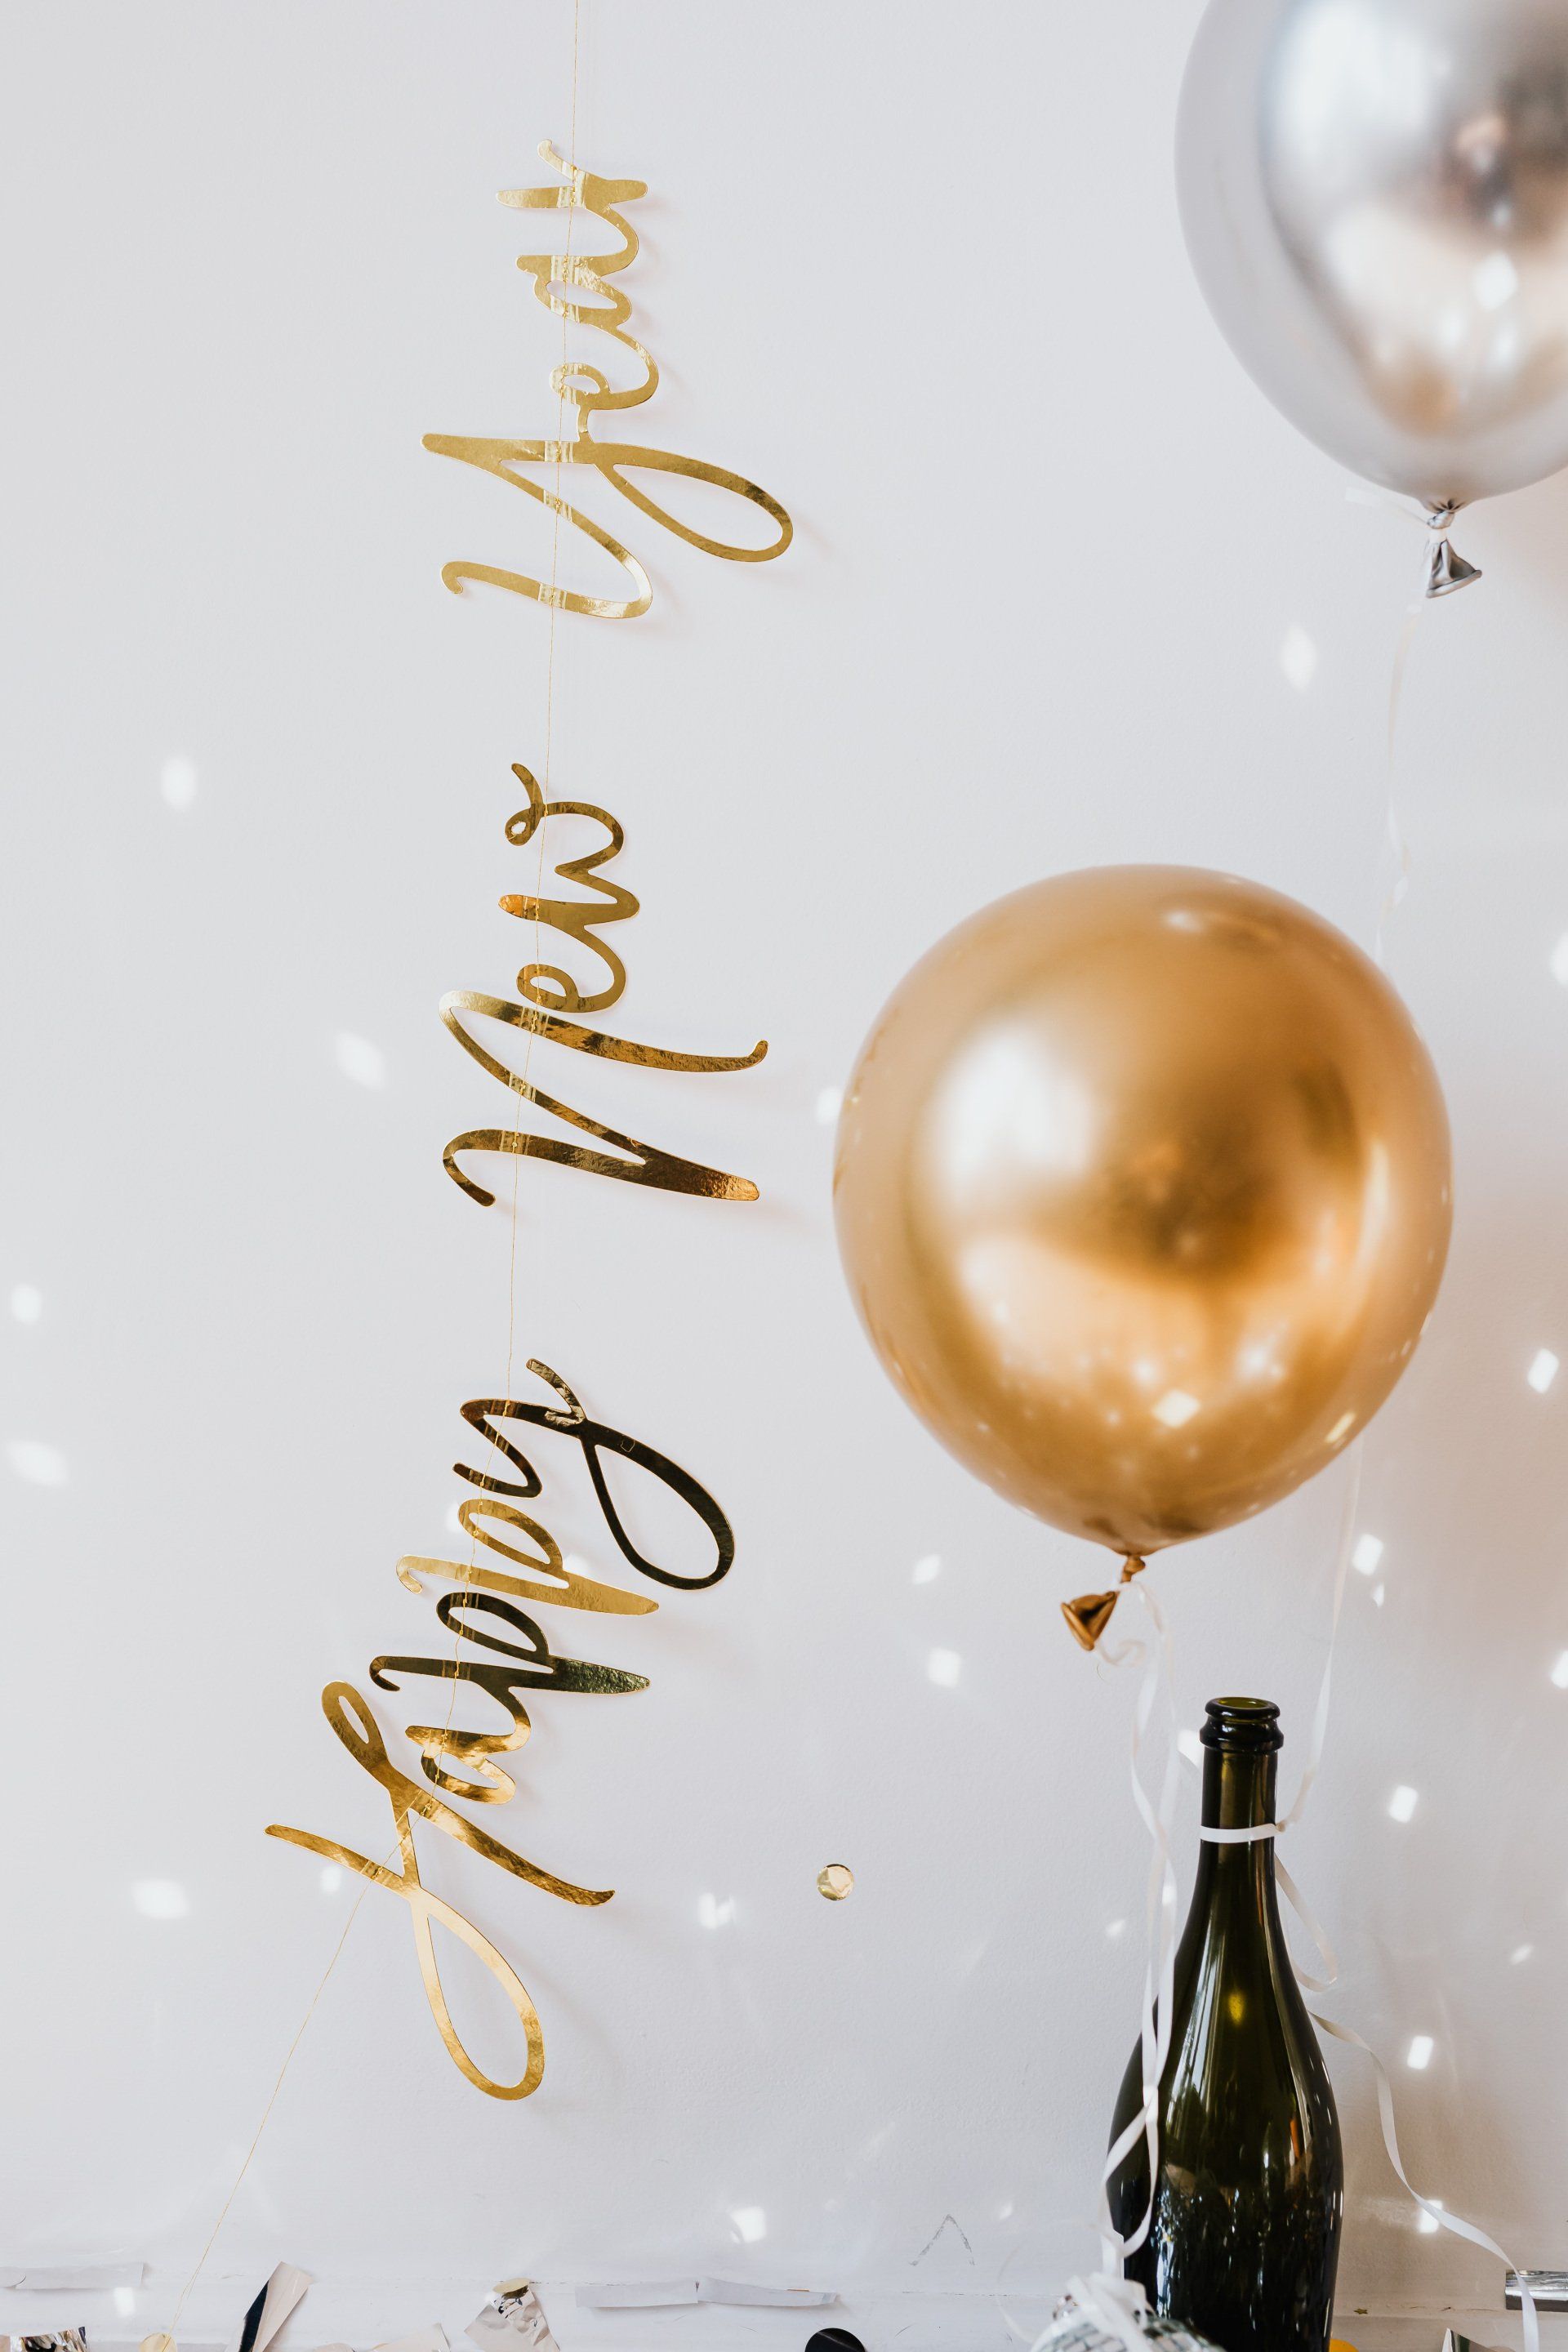 A picture of a gold balloon and a sign that says happy new year